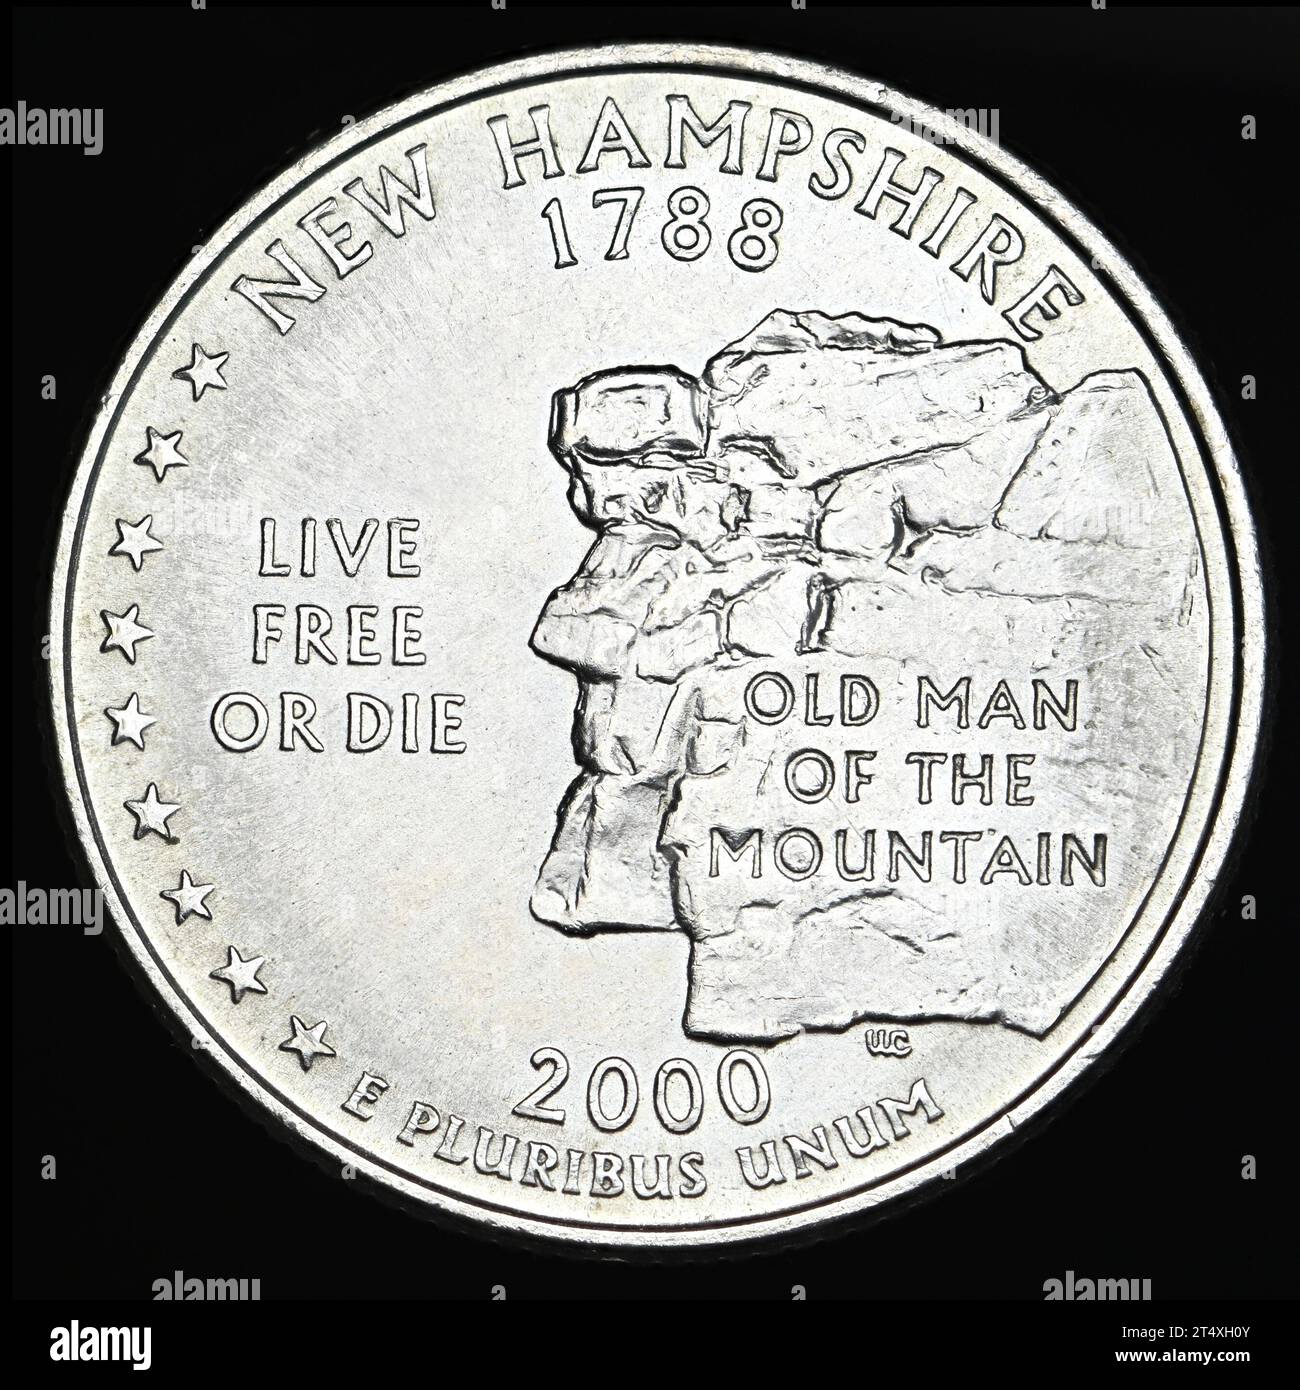 US Commemorative State Quarter Dollar: New Hampshire (1788) Old man of the Mountain Stockfoto